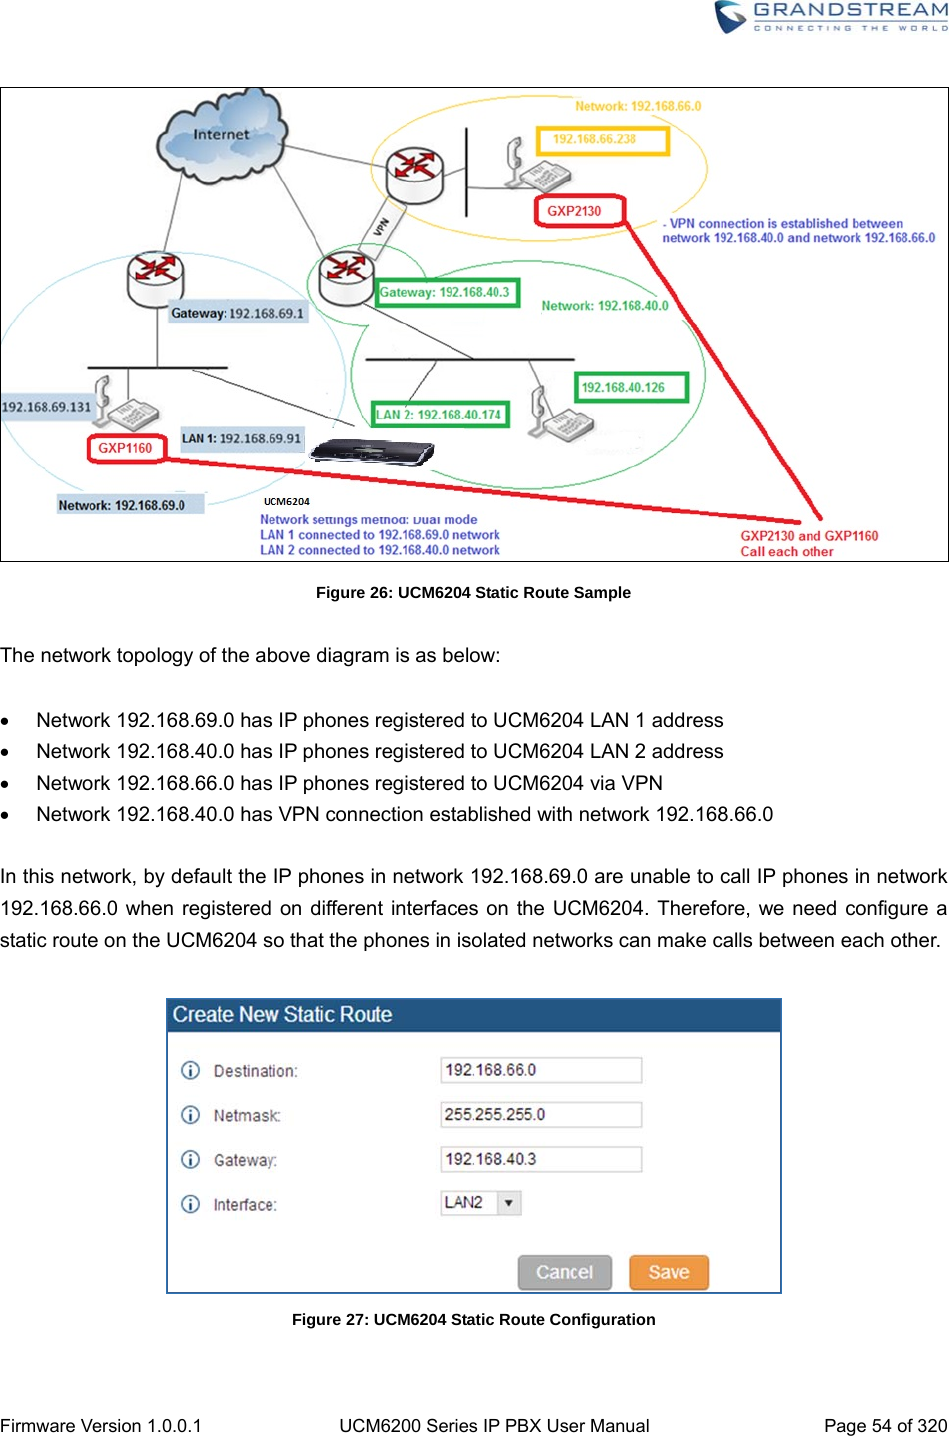  Firmware Version 1.0.0.1  UCM6200 Series IP PBX User Manual  Page 54 of 320  Figure 26: UCM6204 Static Route Sample  The network topology of the above diagram is as below:    Network 192.168.69.0 has IP phones registered to UCM6204 LAN 1 address   Network 192.168.40.0 has IP phones registered to UCM6204 LAN 2 address   Network 192.168.66.0 has IP phones registered to UCM6204 via VPN   Network 192.168.40.0 has VPN connection established with network 192.168.66.0  In this network, by default the IP phones in network 192.168.69.0 are unable to call IP phones in network 192.168.66.0 when registered on different interfaces on the UCM6204. Therefore, we need configure a static route on the UCM6204 so that the phones in isolated networks can make calls between each other.   Figure 27: UCM6204 Static Route Configuration  